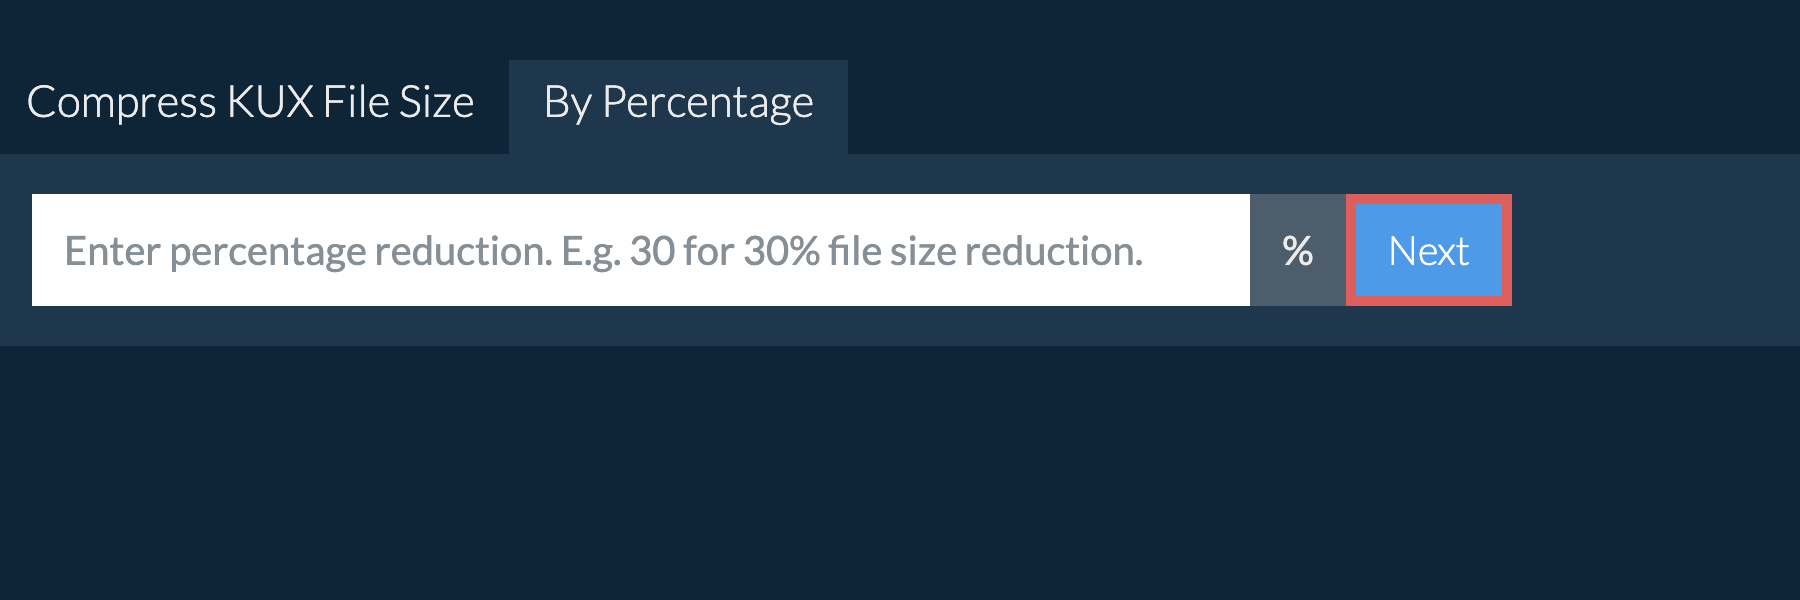 Reduce kux By Percentage